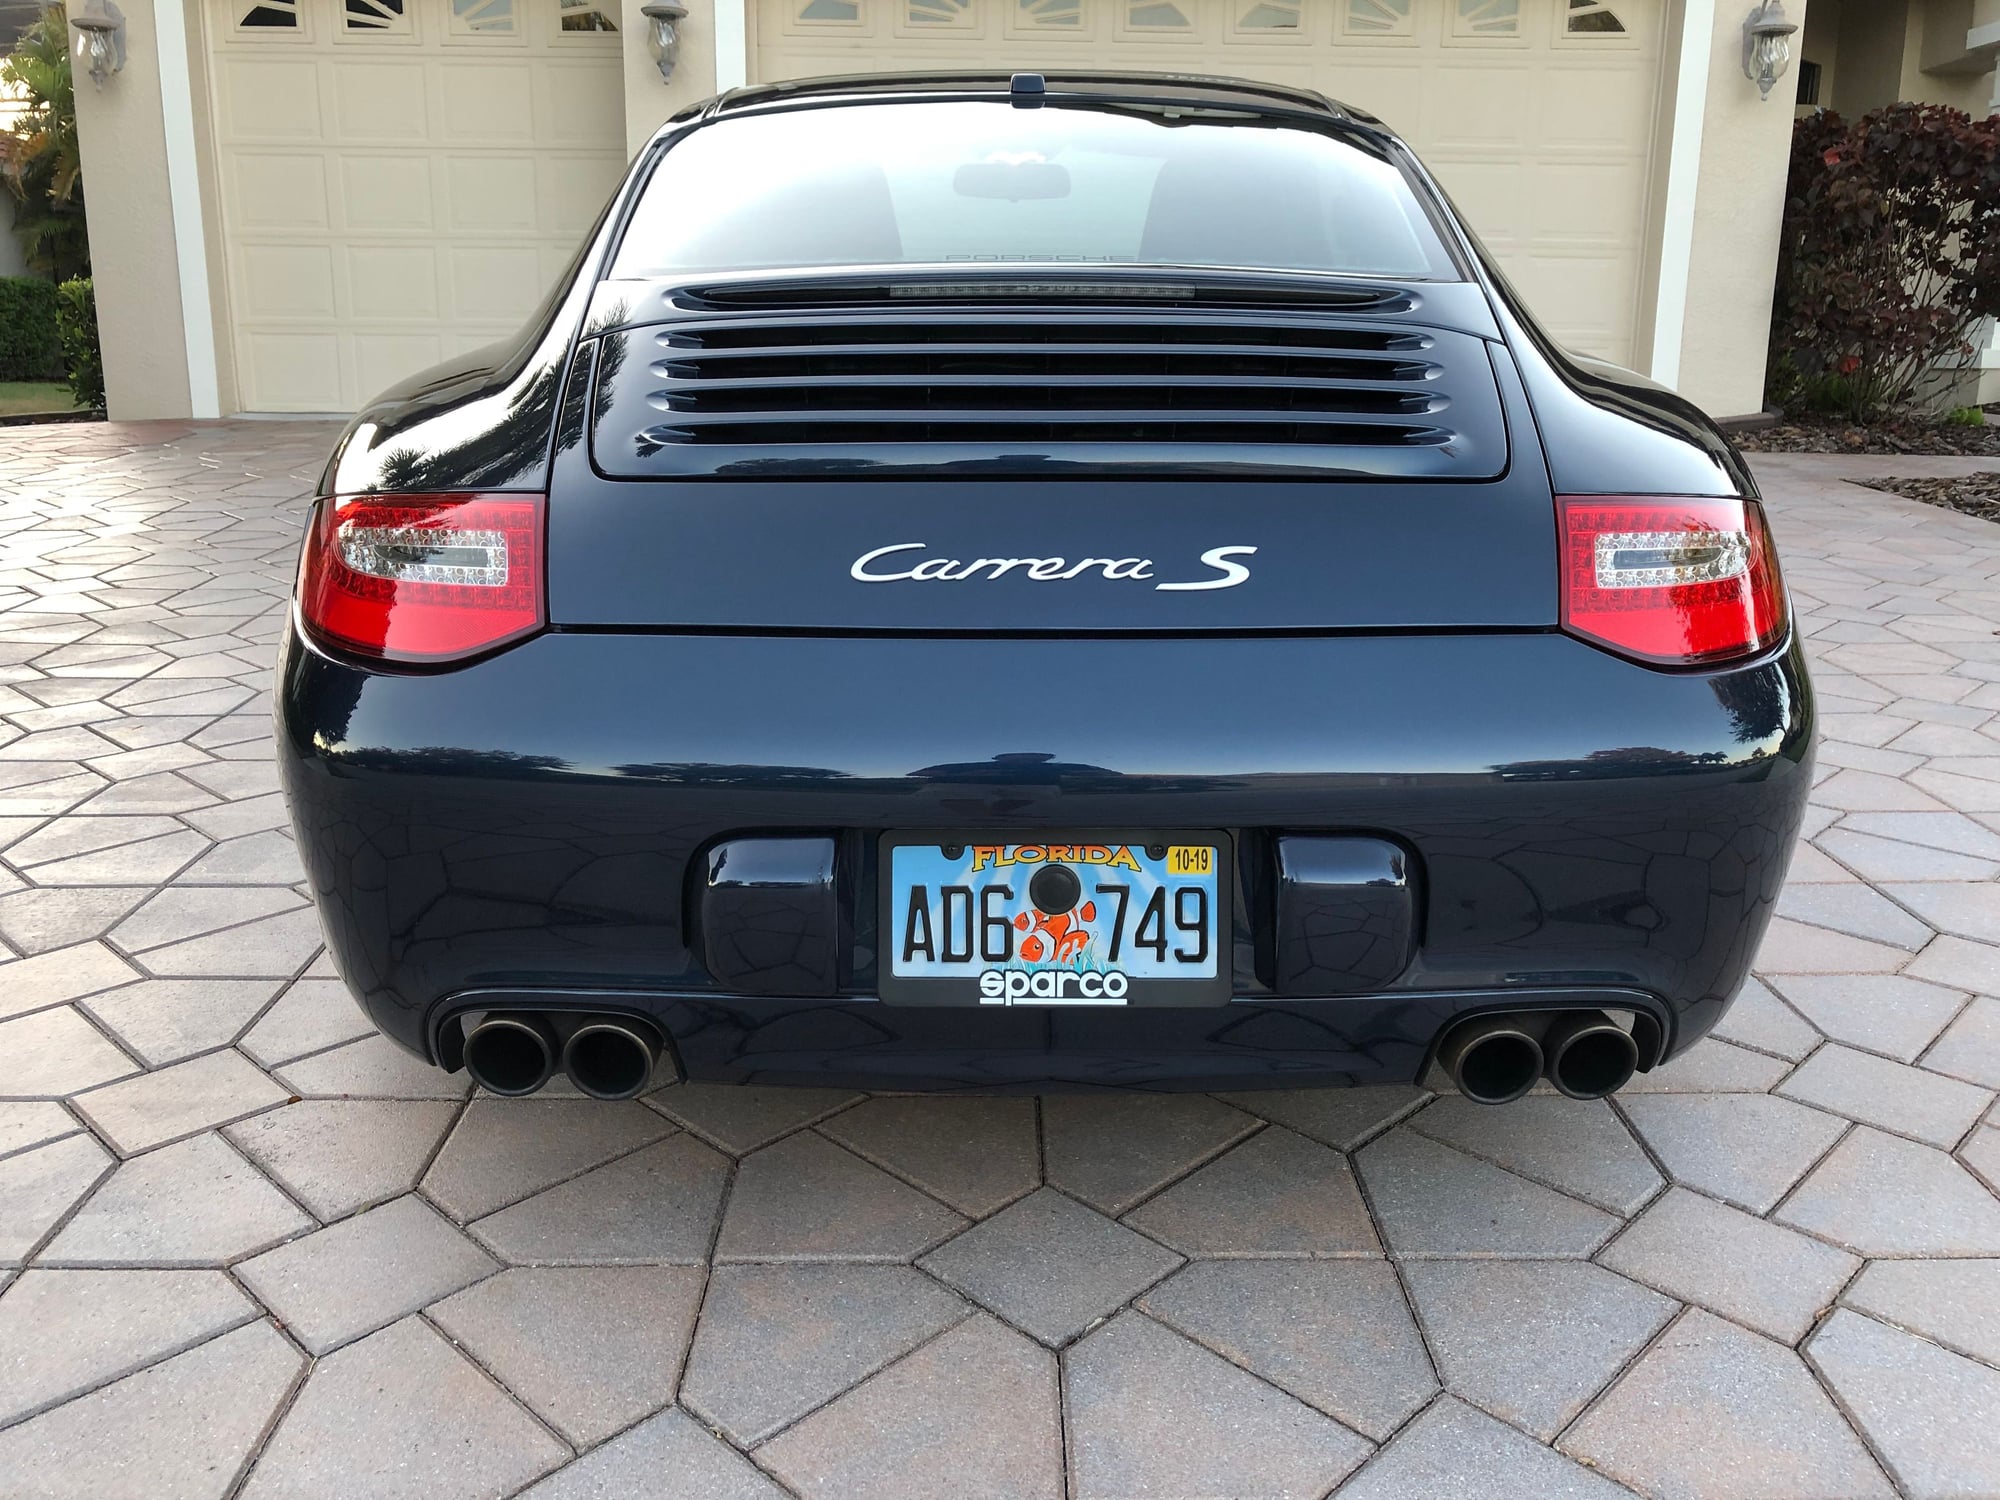 2011 Porsche 911 - 2011 997.2 Carrera S - Used - VIN WP0AB2A96BS721065 - 66,181 Miles - 6 cyl - 2WD - Manual - Coupe - Blue - Bradenton, FL 34202, United States